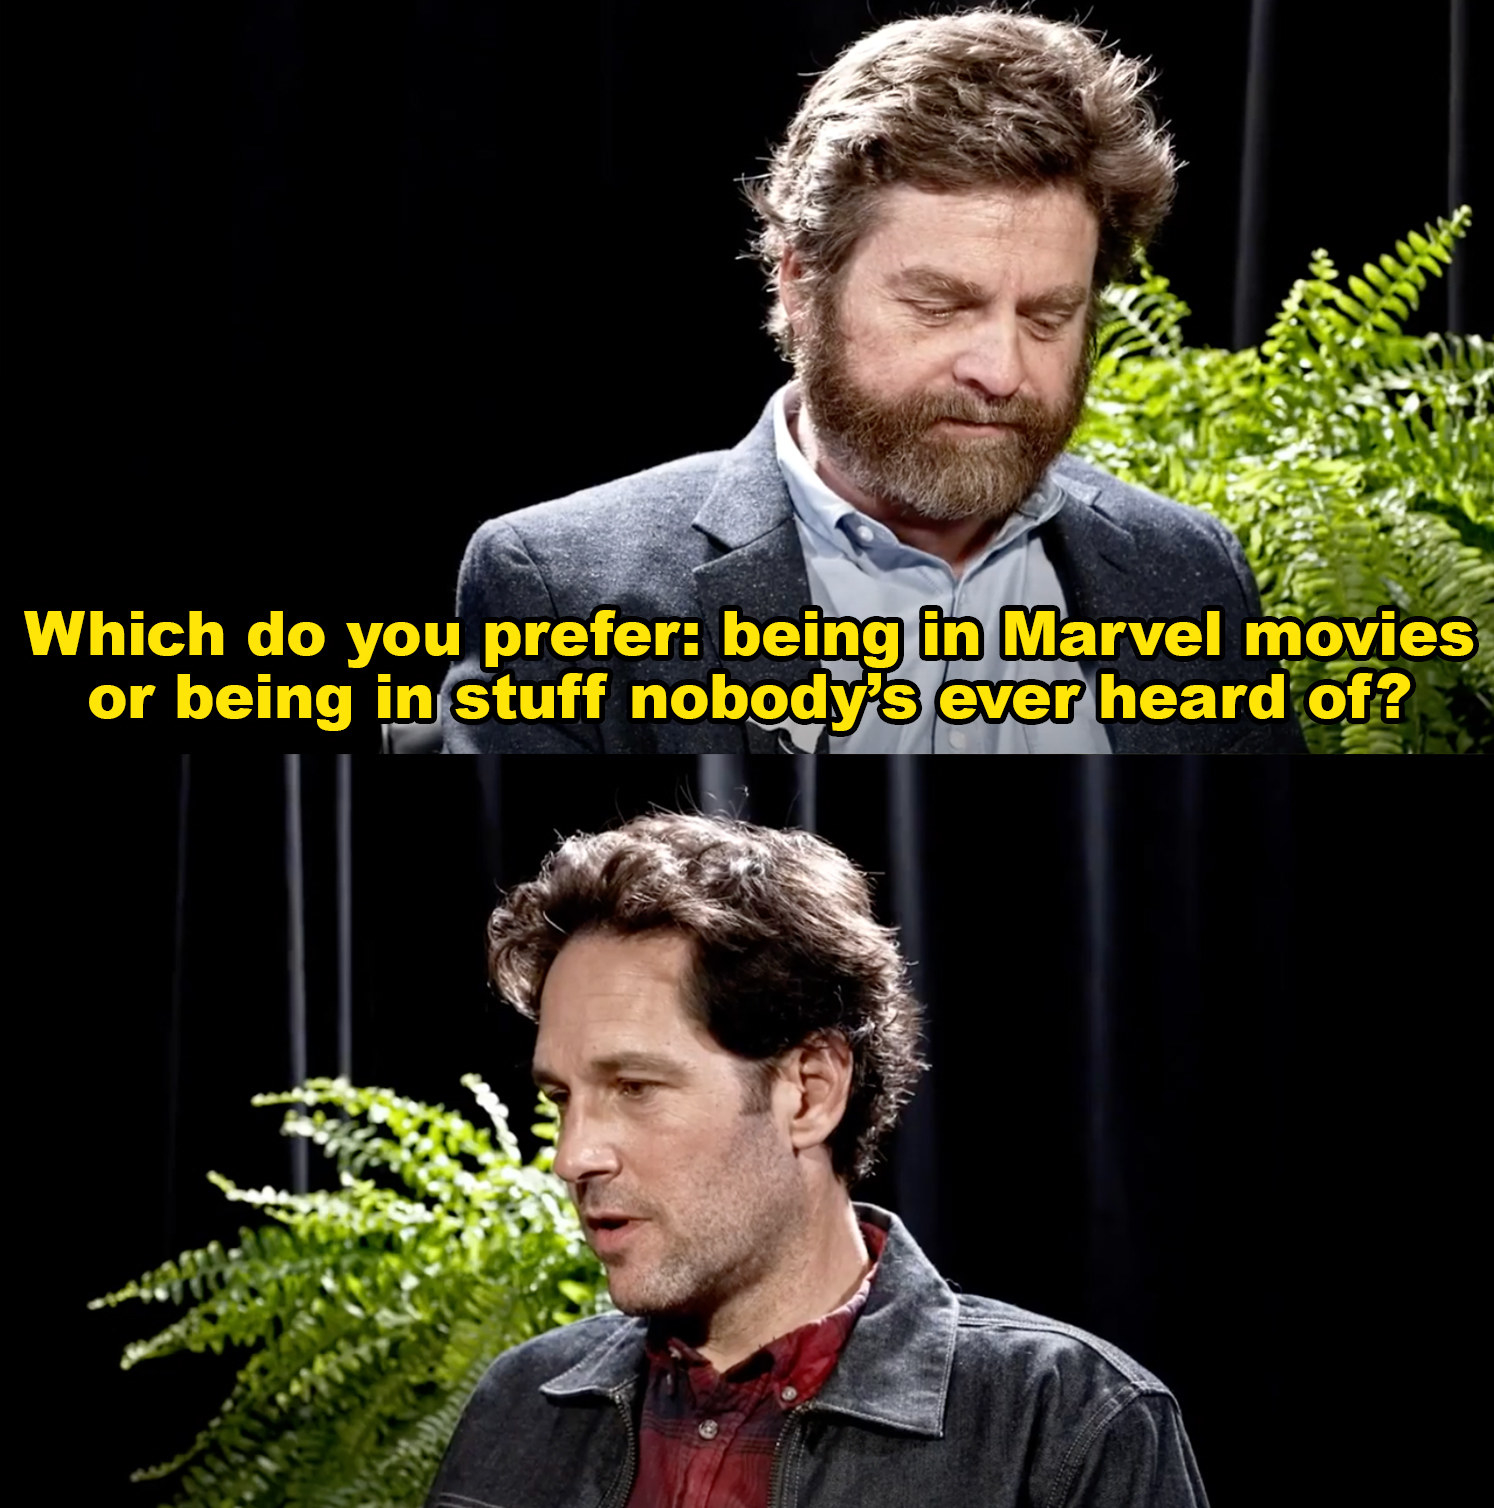 Zach asking Paul Rudd which do you prefer, being in Marvel movies or being in stuff nobody&#x27;s ever heard of?